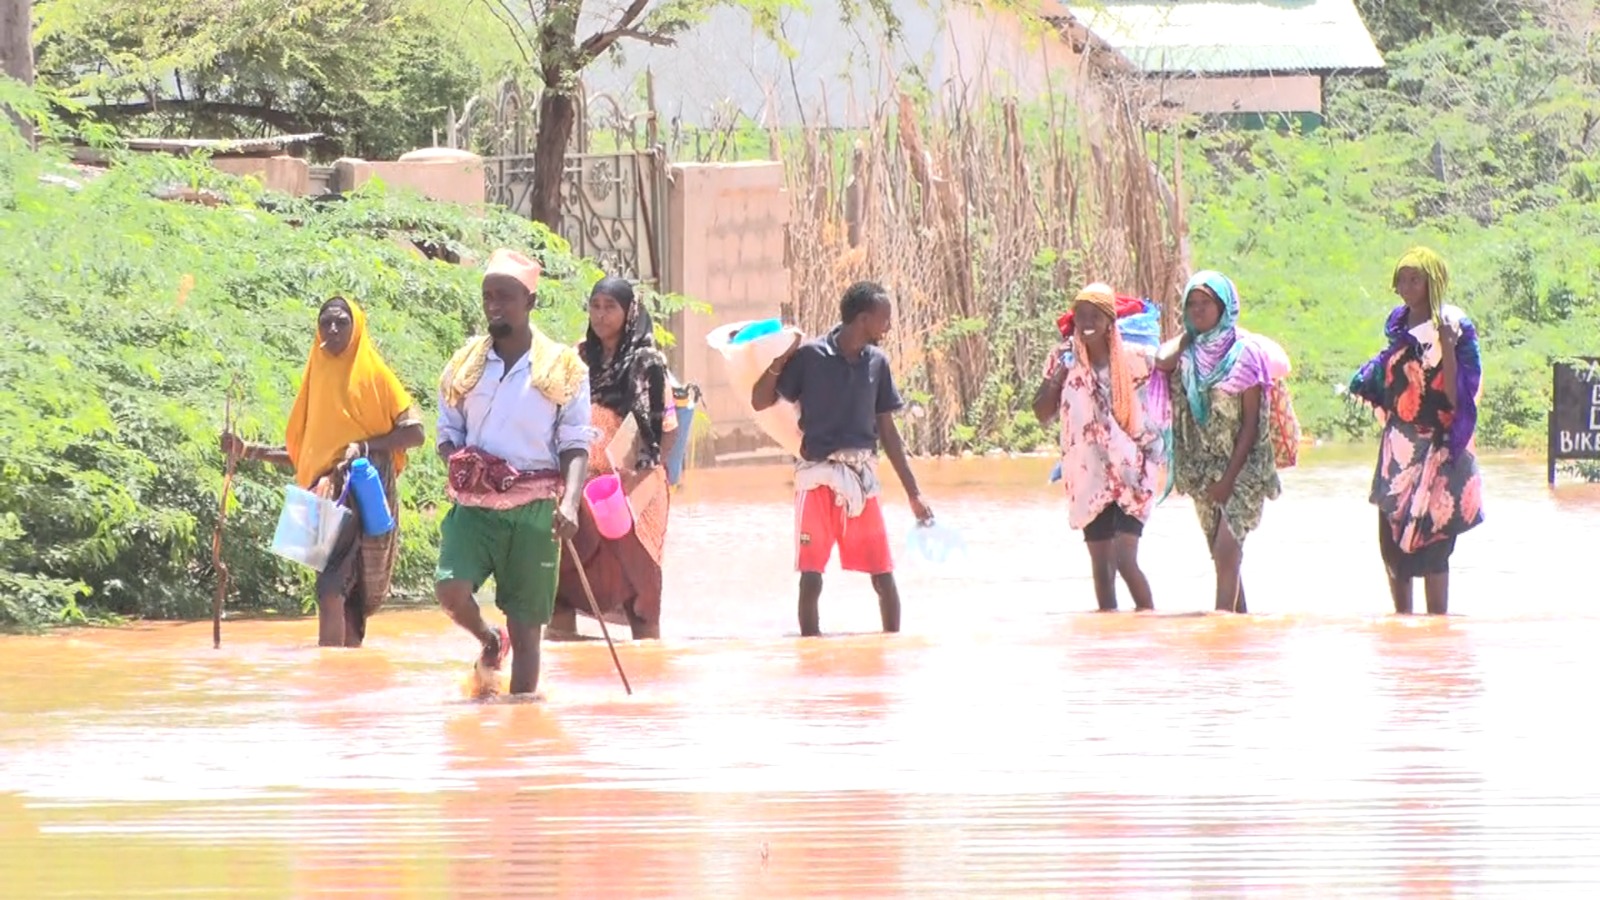 Pupils in schools affected by floods moved to neighbouring institutions